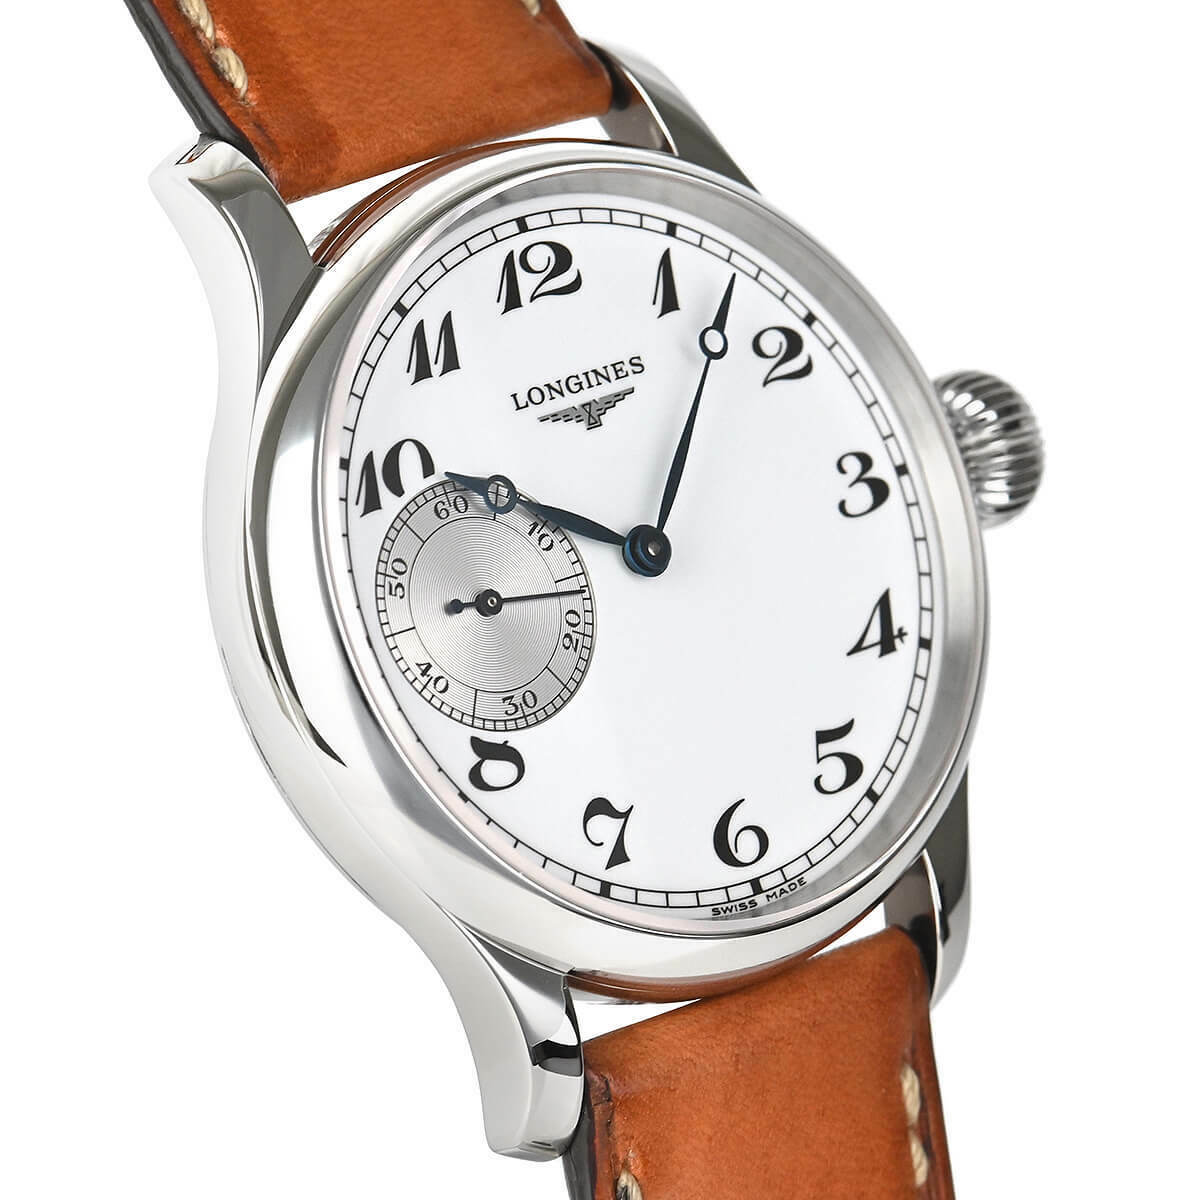 LONGINES Weems Maxi 170th Anniversary Limited L2.639.4 - Japanese-Online-Store (JOS)